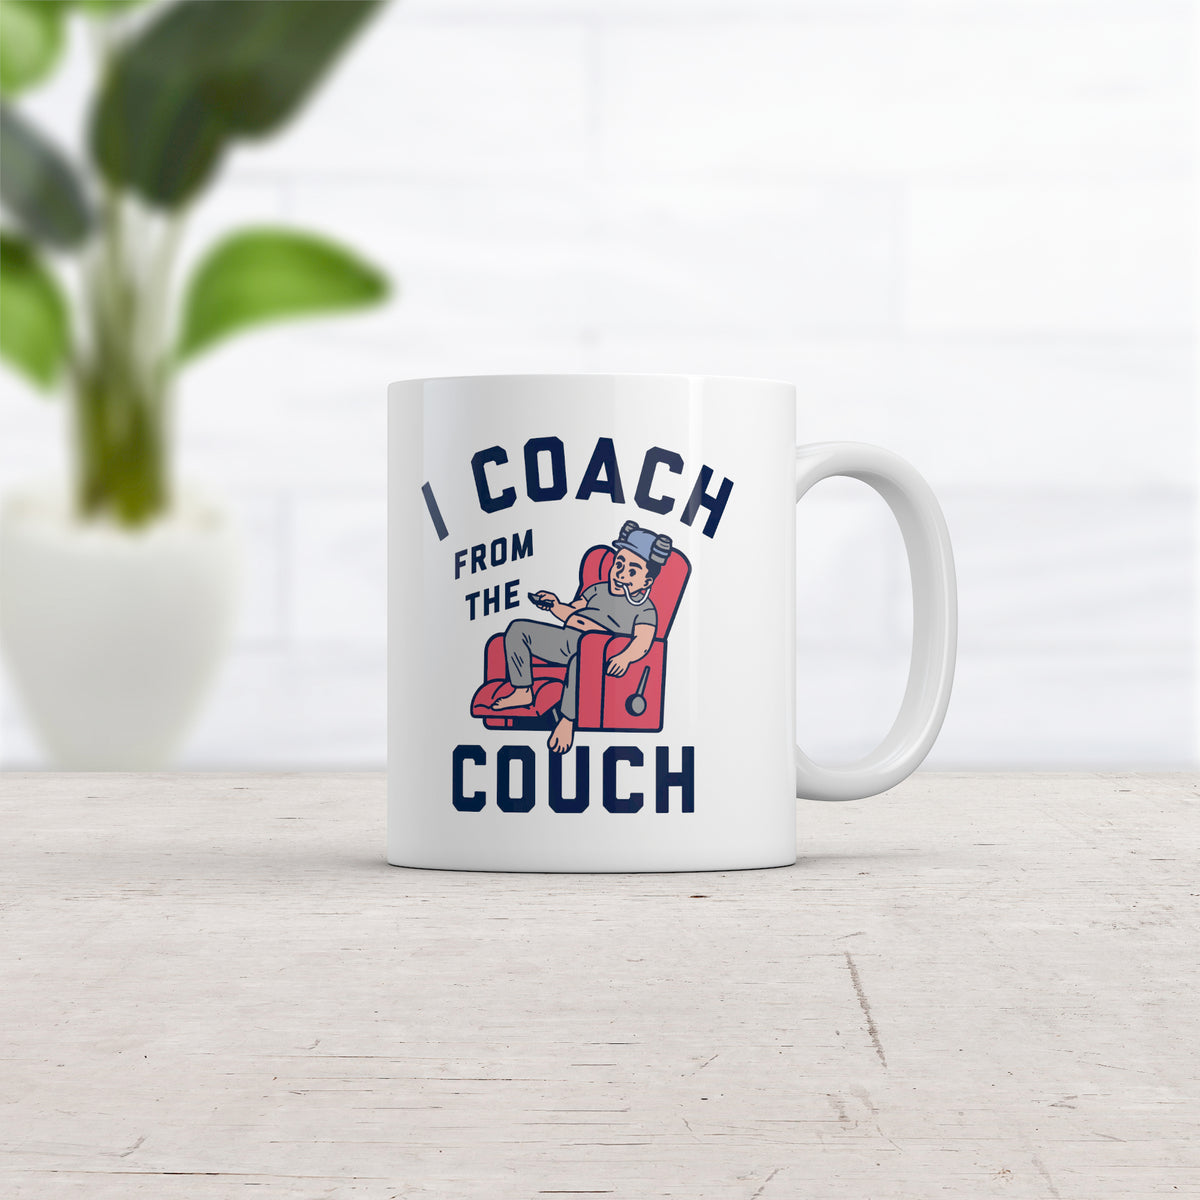 I Coach From The Couch Mug